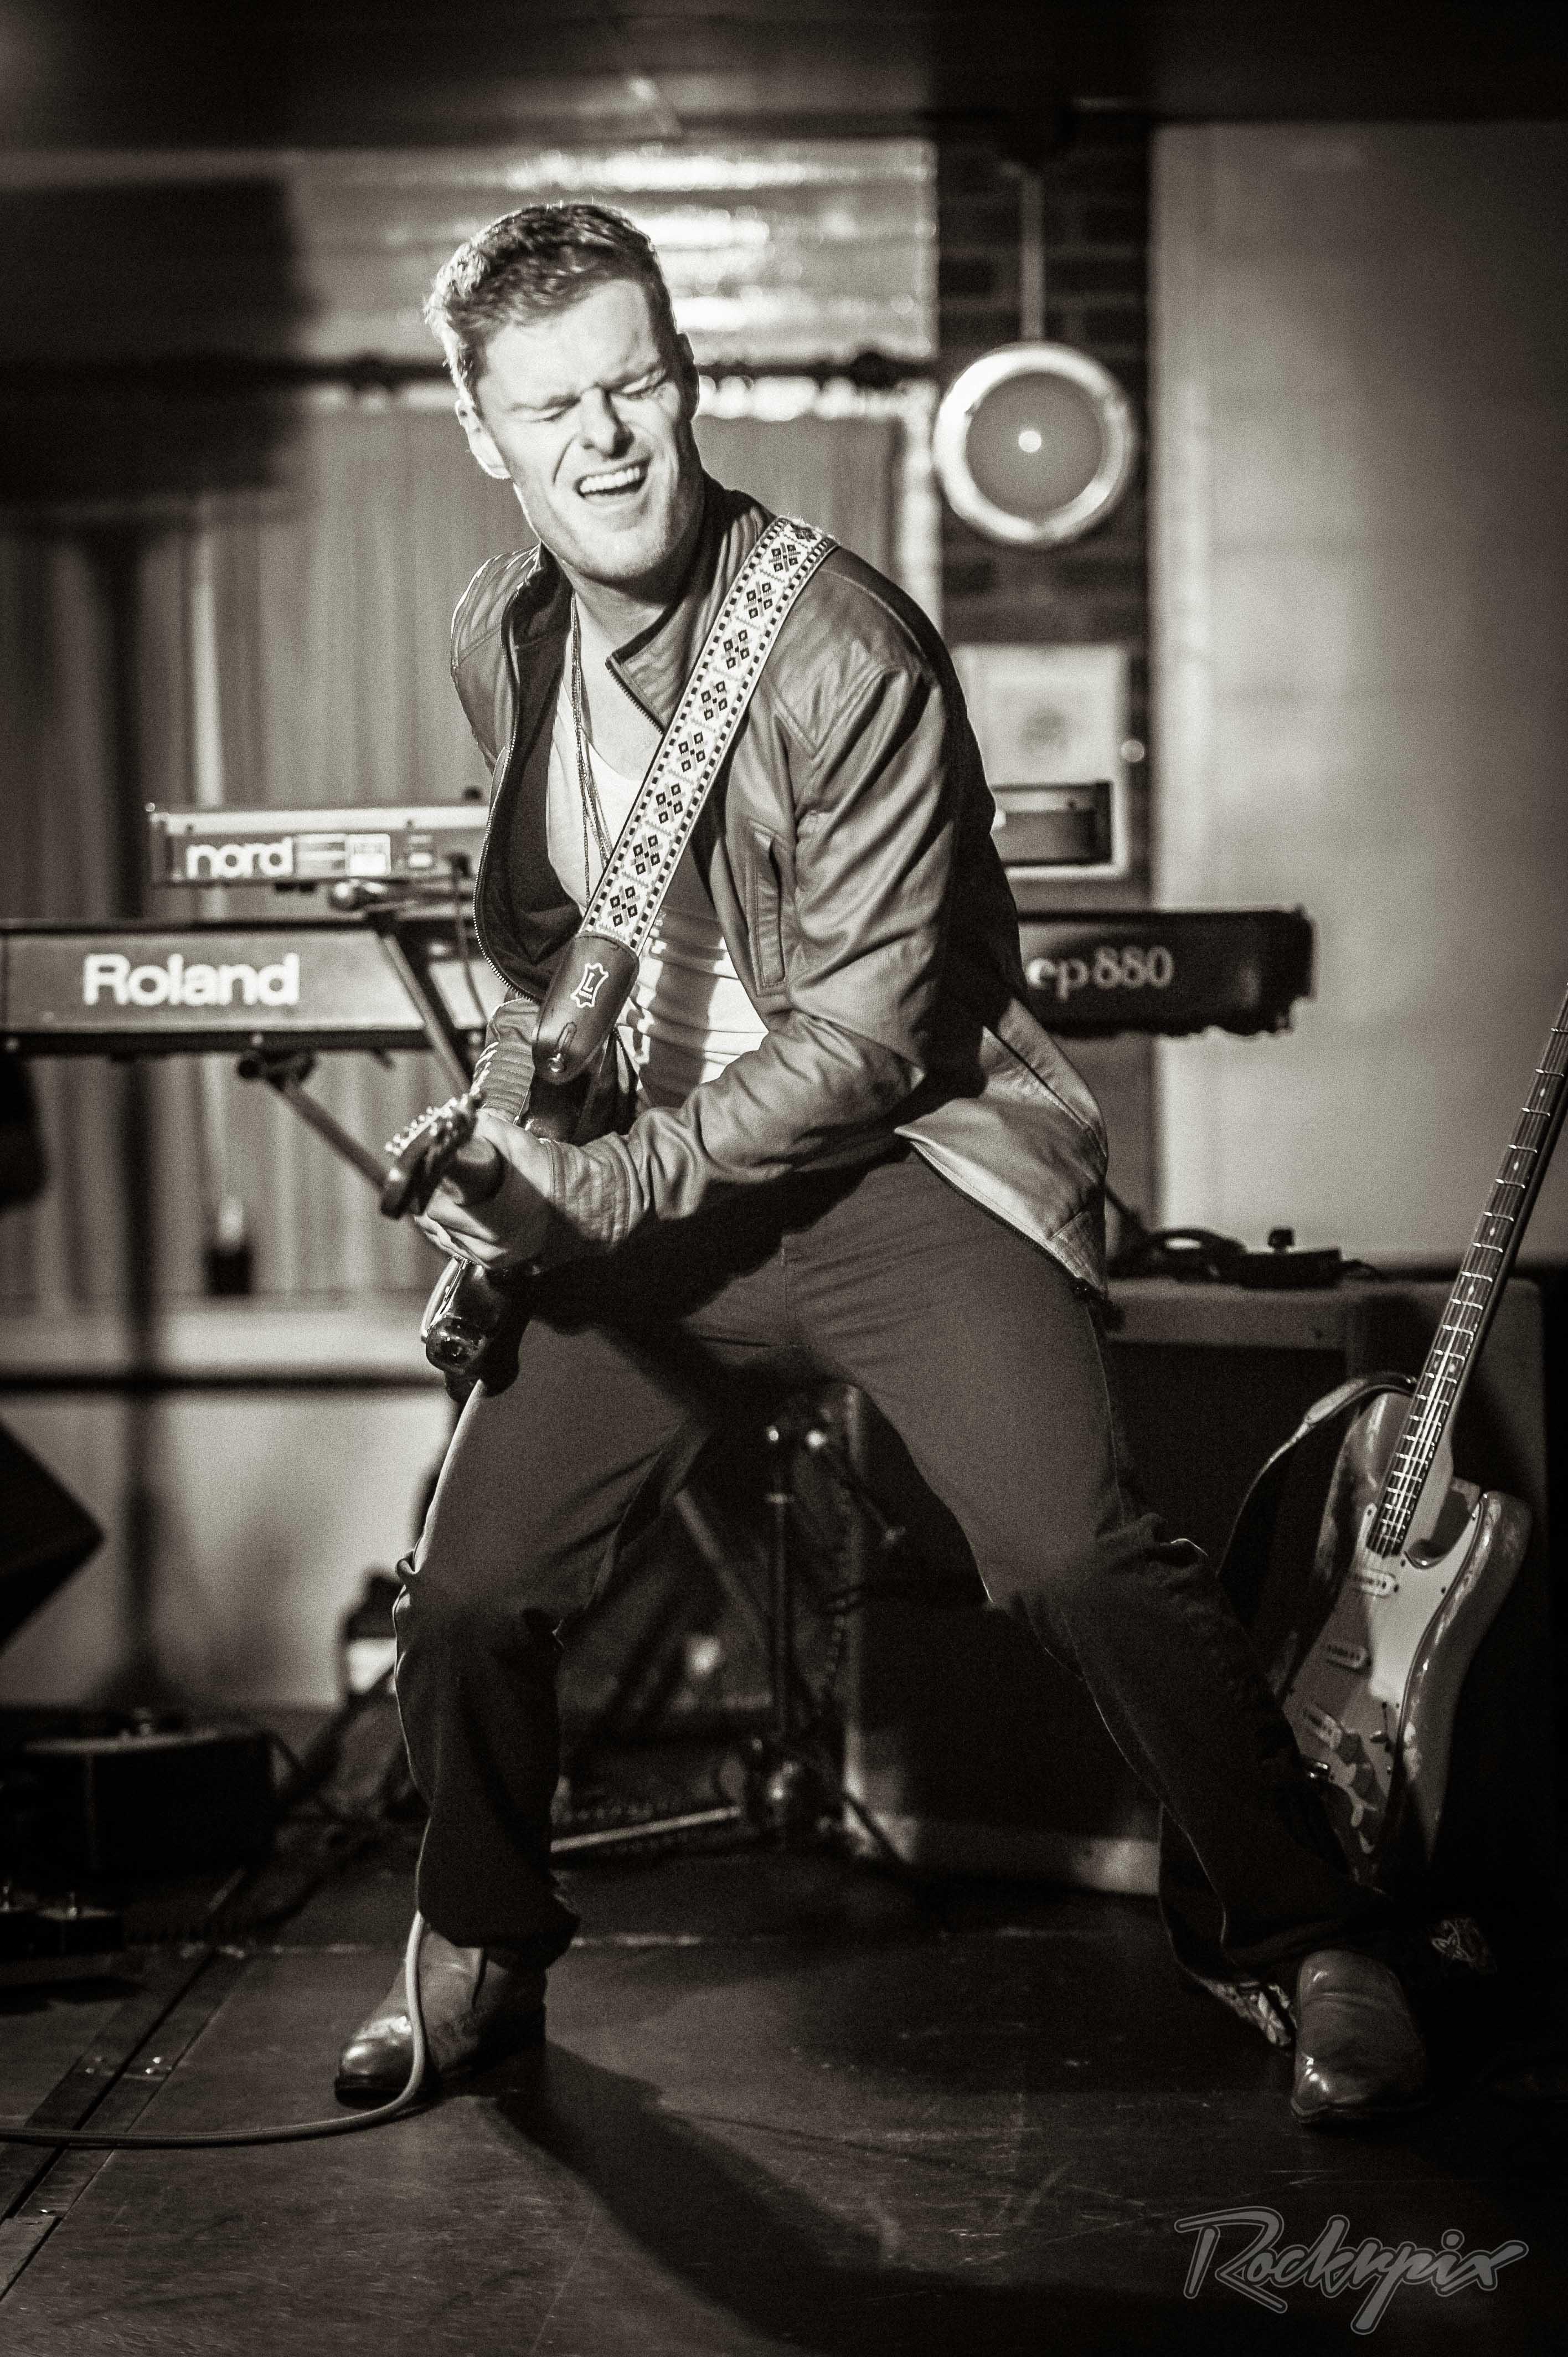 MIKE BROOKFIELD BAND – Boom Boom Club, Sutton, 9 October 2015